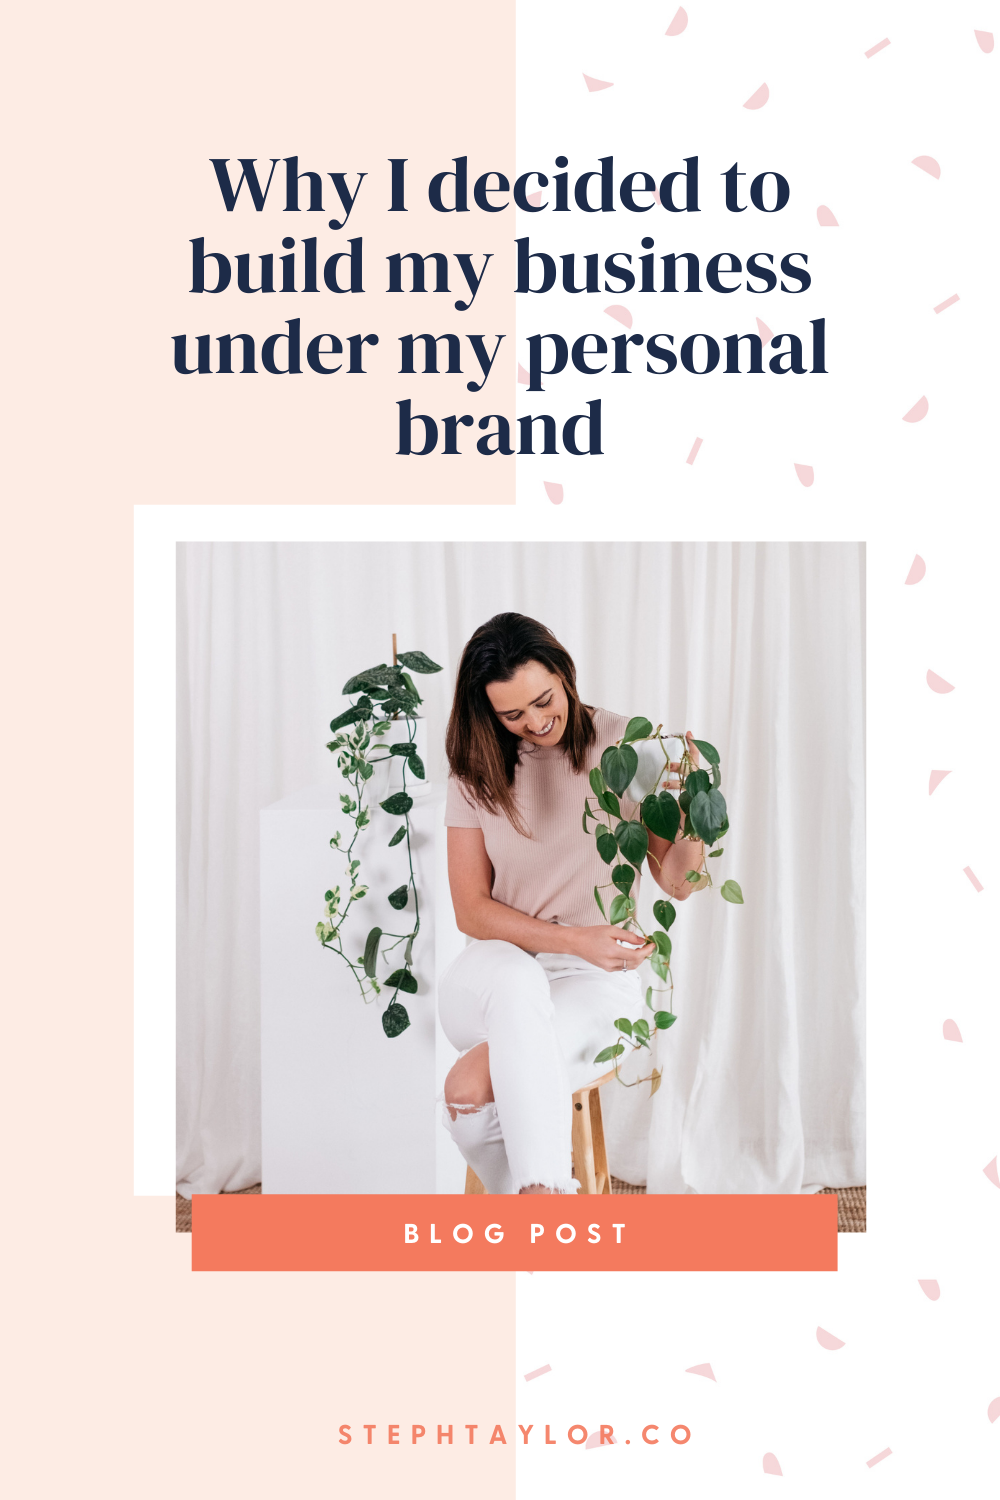 Why I built my business under a personal brand